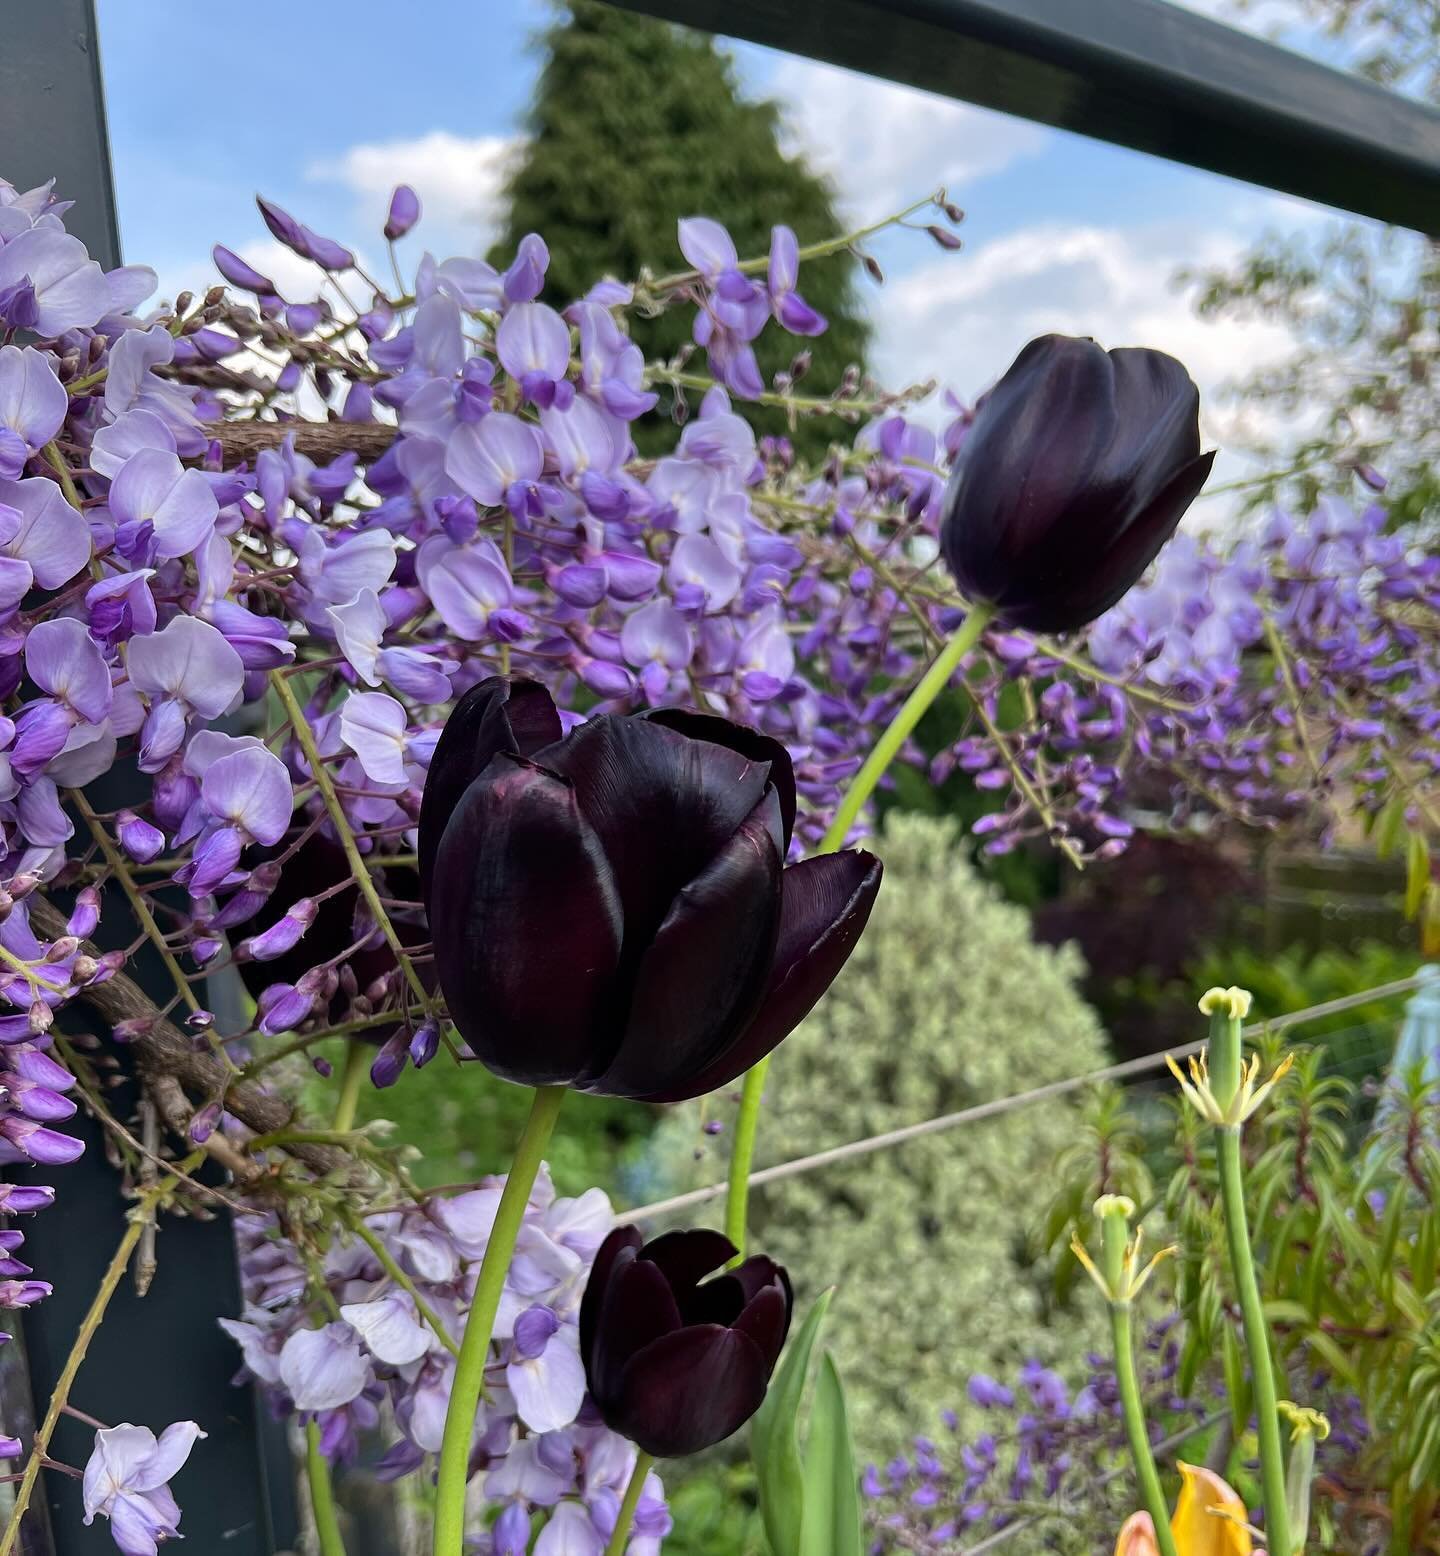 Tulips have almost finished flowering for this year but the coincidence of &lsquo;Cafe Noir&rsquo; against my wisteria is a pretty cool accident
.
.
.
#GardenDesign #PlantingDesign #Tulip #Wisteria #Bulbs #ClimbingPlants #SpringColour #SpringGarden